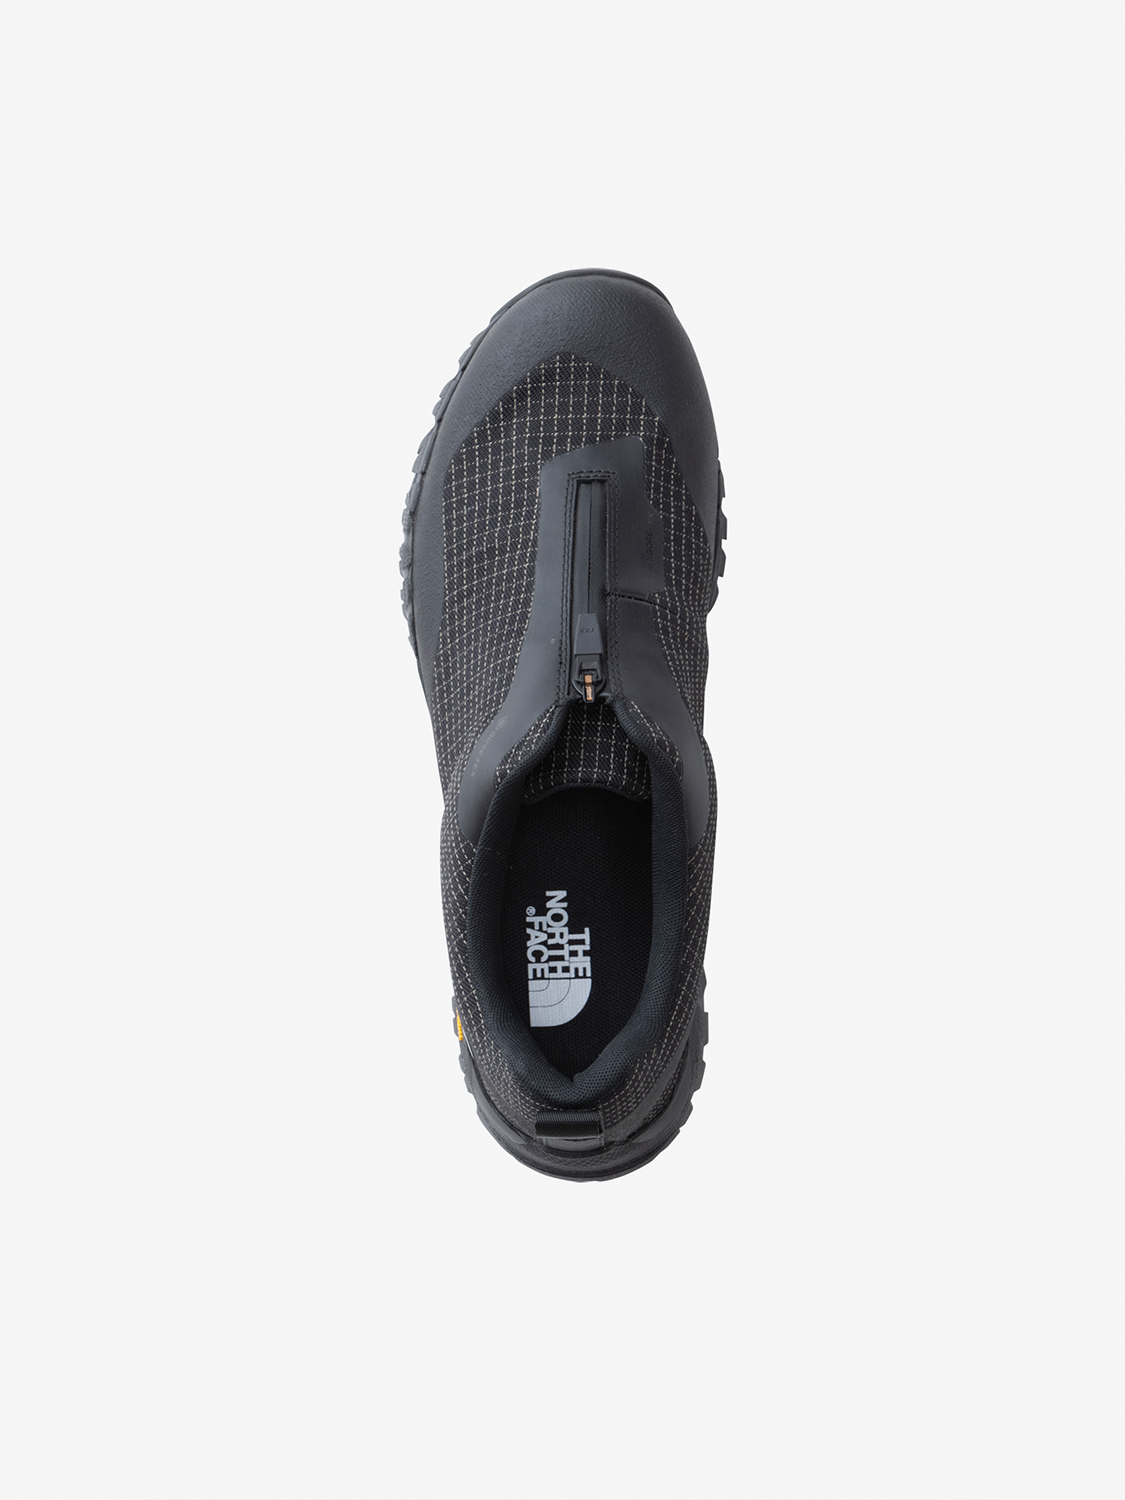 The North Face Is Dropping ROA-Esque Laceless Outdoor Shoes